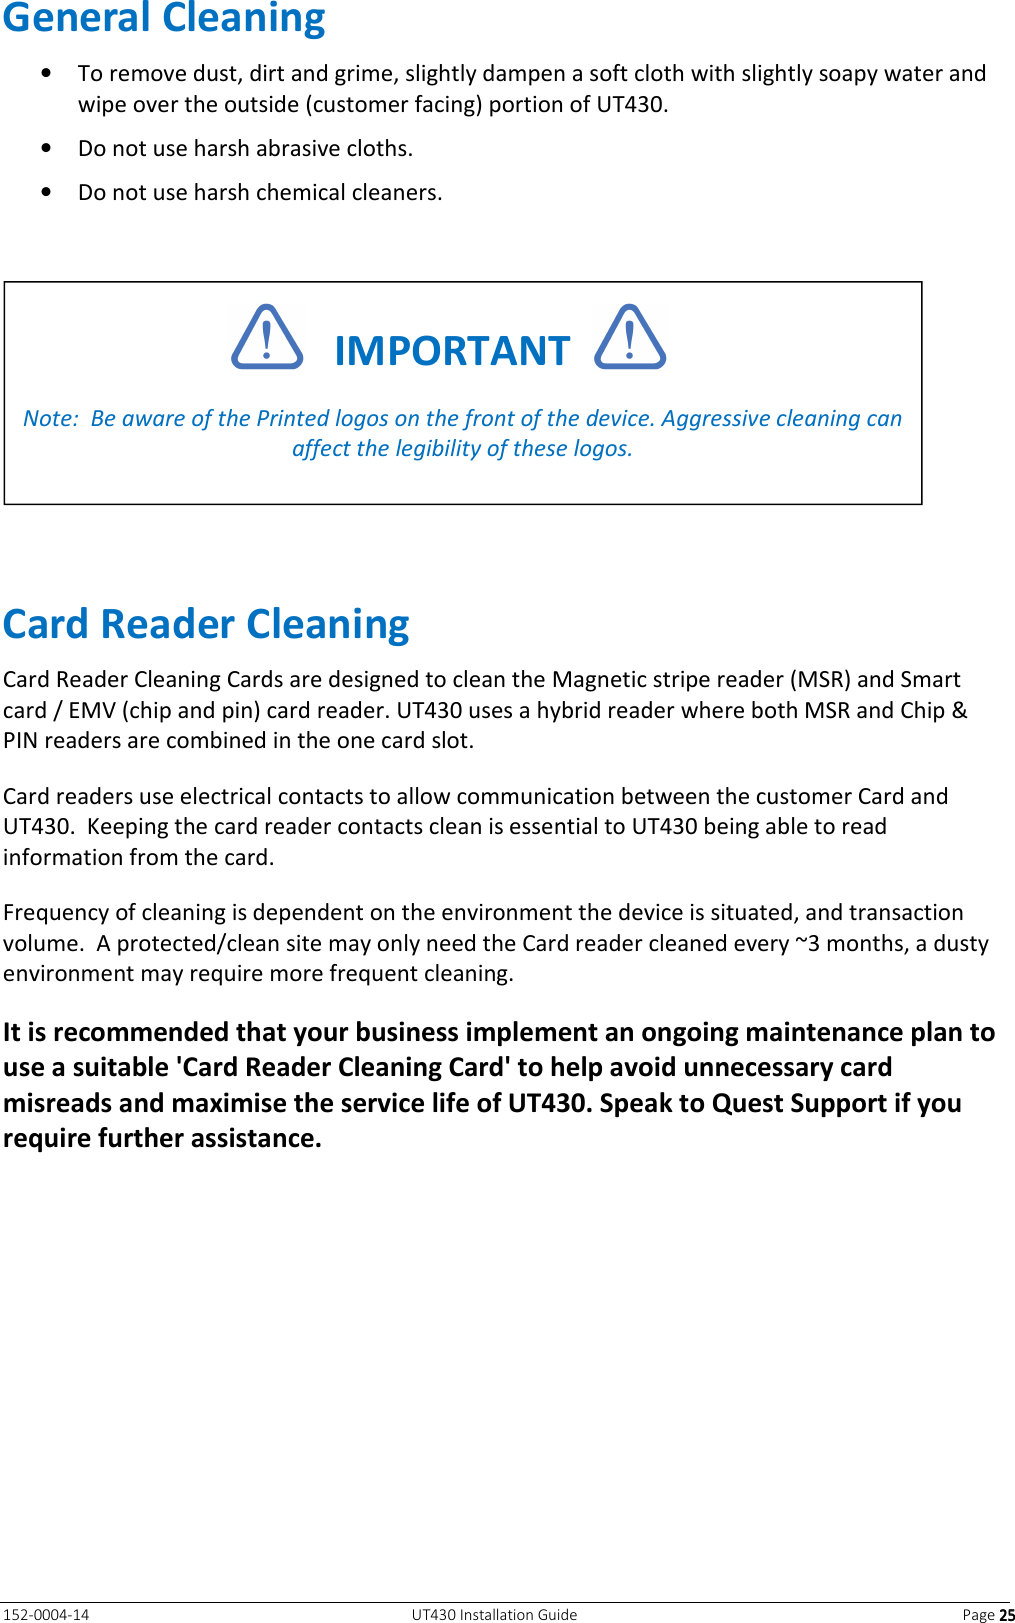   152-0004-14  UT430 Installation Guide  Page 25252525 General Cleaning • To remove dust, dirt and grime, slightly dampen a soft cloth with slightly soapy water and wipe over the outside (customer facing) portion of UT430. • Do not use harsh abrasive cloths. • Do not use harsh chemical cleaners.    Card Reader Cleaning Card Reader Cleaning Cards are designed to clean the Magnetic stripe reader (MSR) and Smart card / EMV (chip and pin) card reader. UT430 uses a hybrid reader where both MSR and Chip &amp; PIN readers are combined in the one card slot.  Card readers use electrical contacts to allow communication between the customer Card and UT430.  Keeping the card reader contacts clean is essential to UT430 being able to read information from the card. Frequency of cleaning is dependent on the environment the device is situated, and transaction volume.  A protected/clean site may only need the Card reader cleaned every ~3 months, a dusty environment may require more frequent cleaning. It is recommended that your business implement an ongoing maintenance plan to use a suitable &apos;Card Reader Cleaning Card&apos; to help avoid unnecessary card misreads and maximise the service life of UT430. Speak to Quest Support if you require further assistance.      IMPORTANT    Note:  Be aware of the Printed logos on the front of the device. Aggressive cleaning can affect the legibility of these logos.  